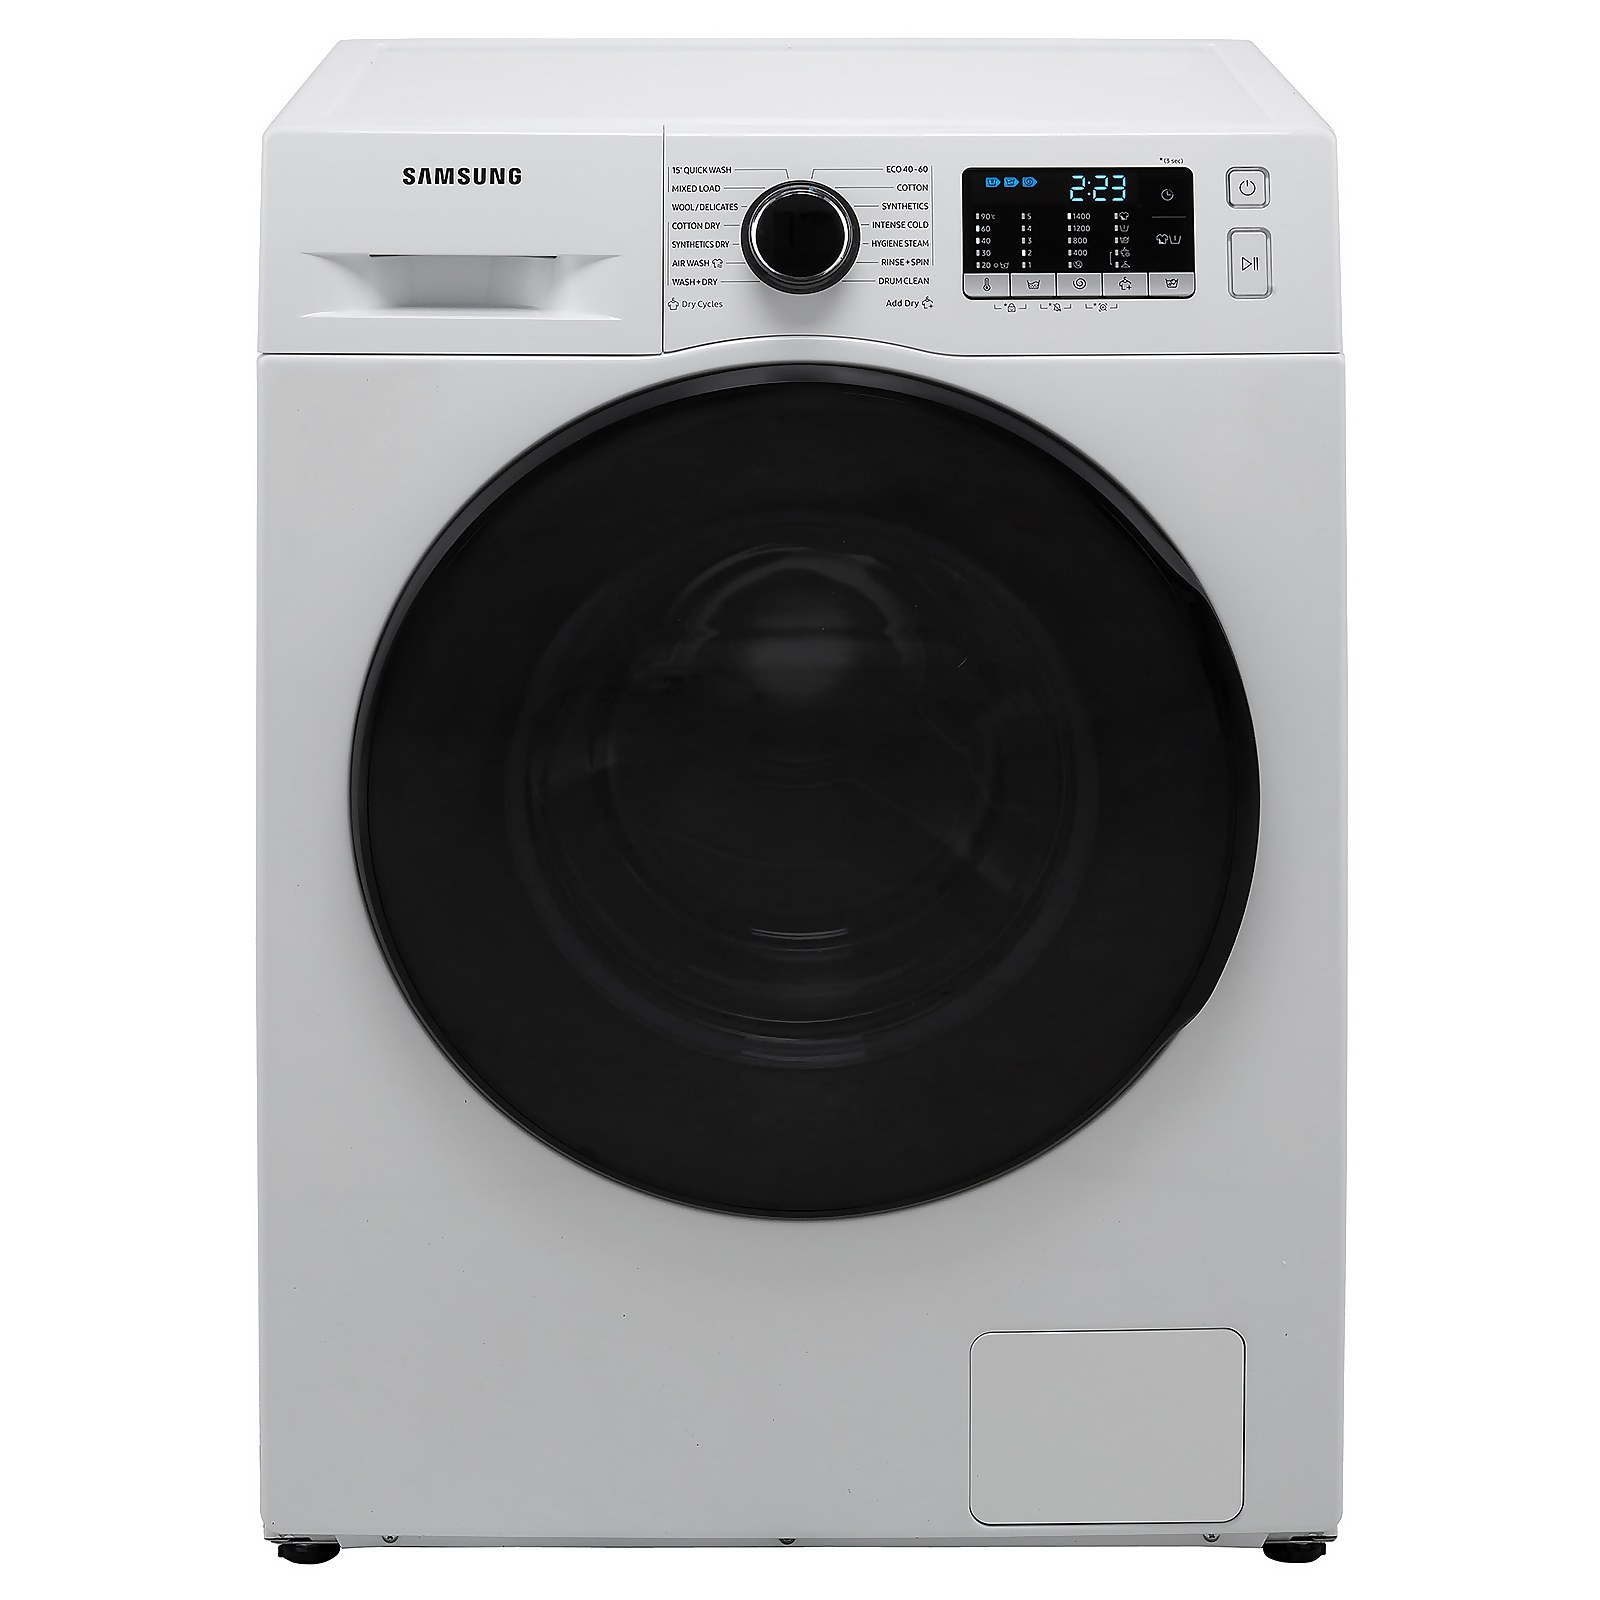 Samsung Series 5 ecobubble™ WD80TA046BE 8Kg / 5Kg Washer Dryer with 1400 rpm - White